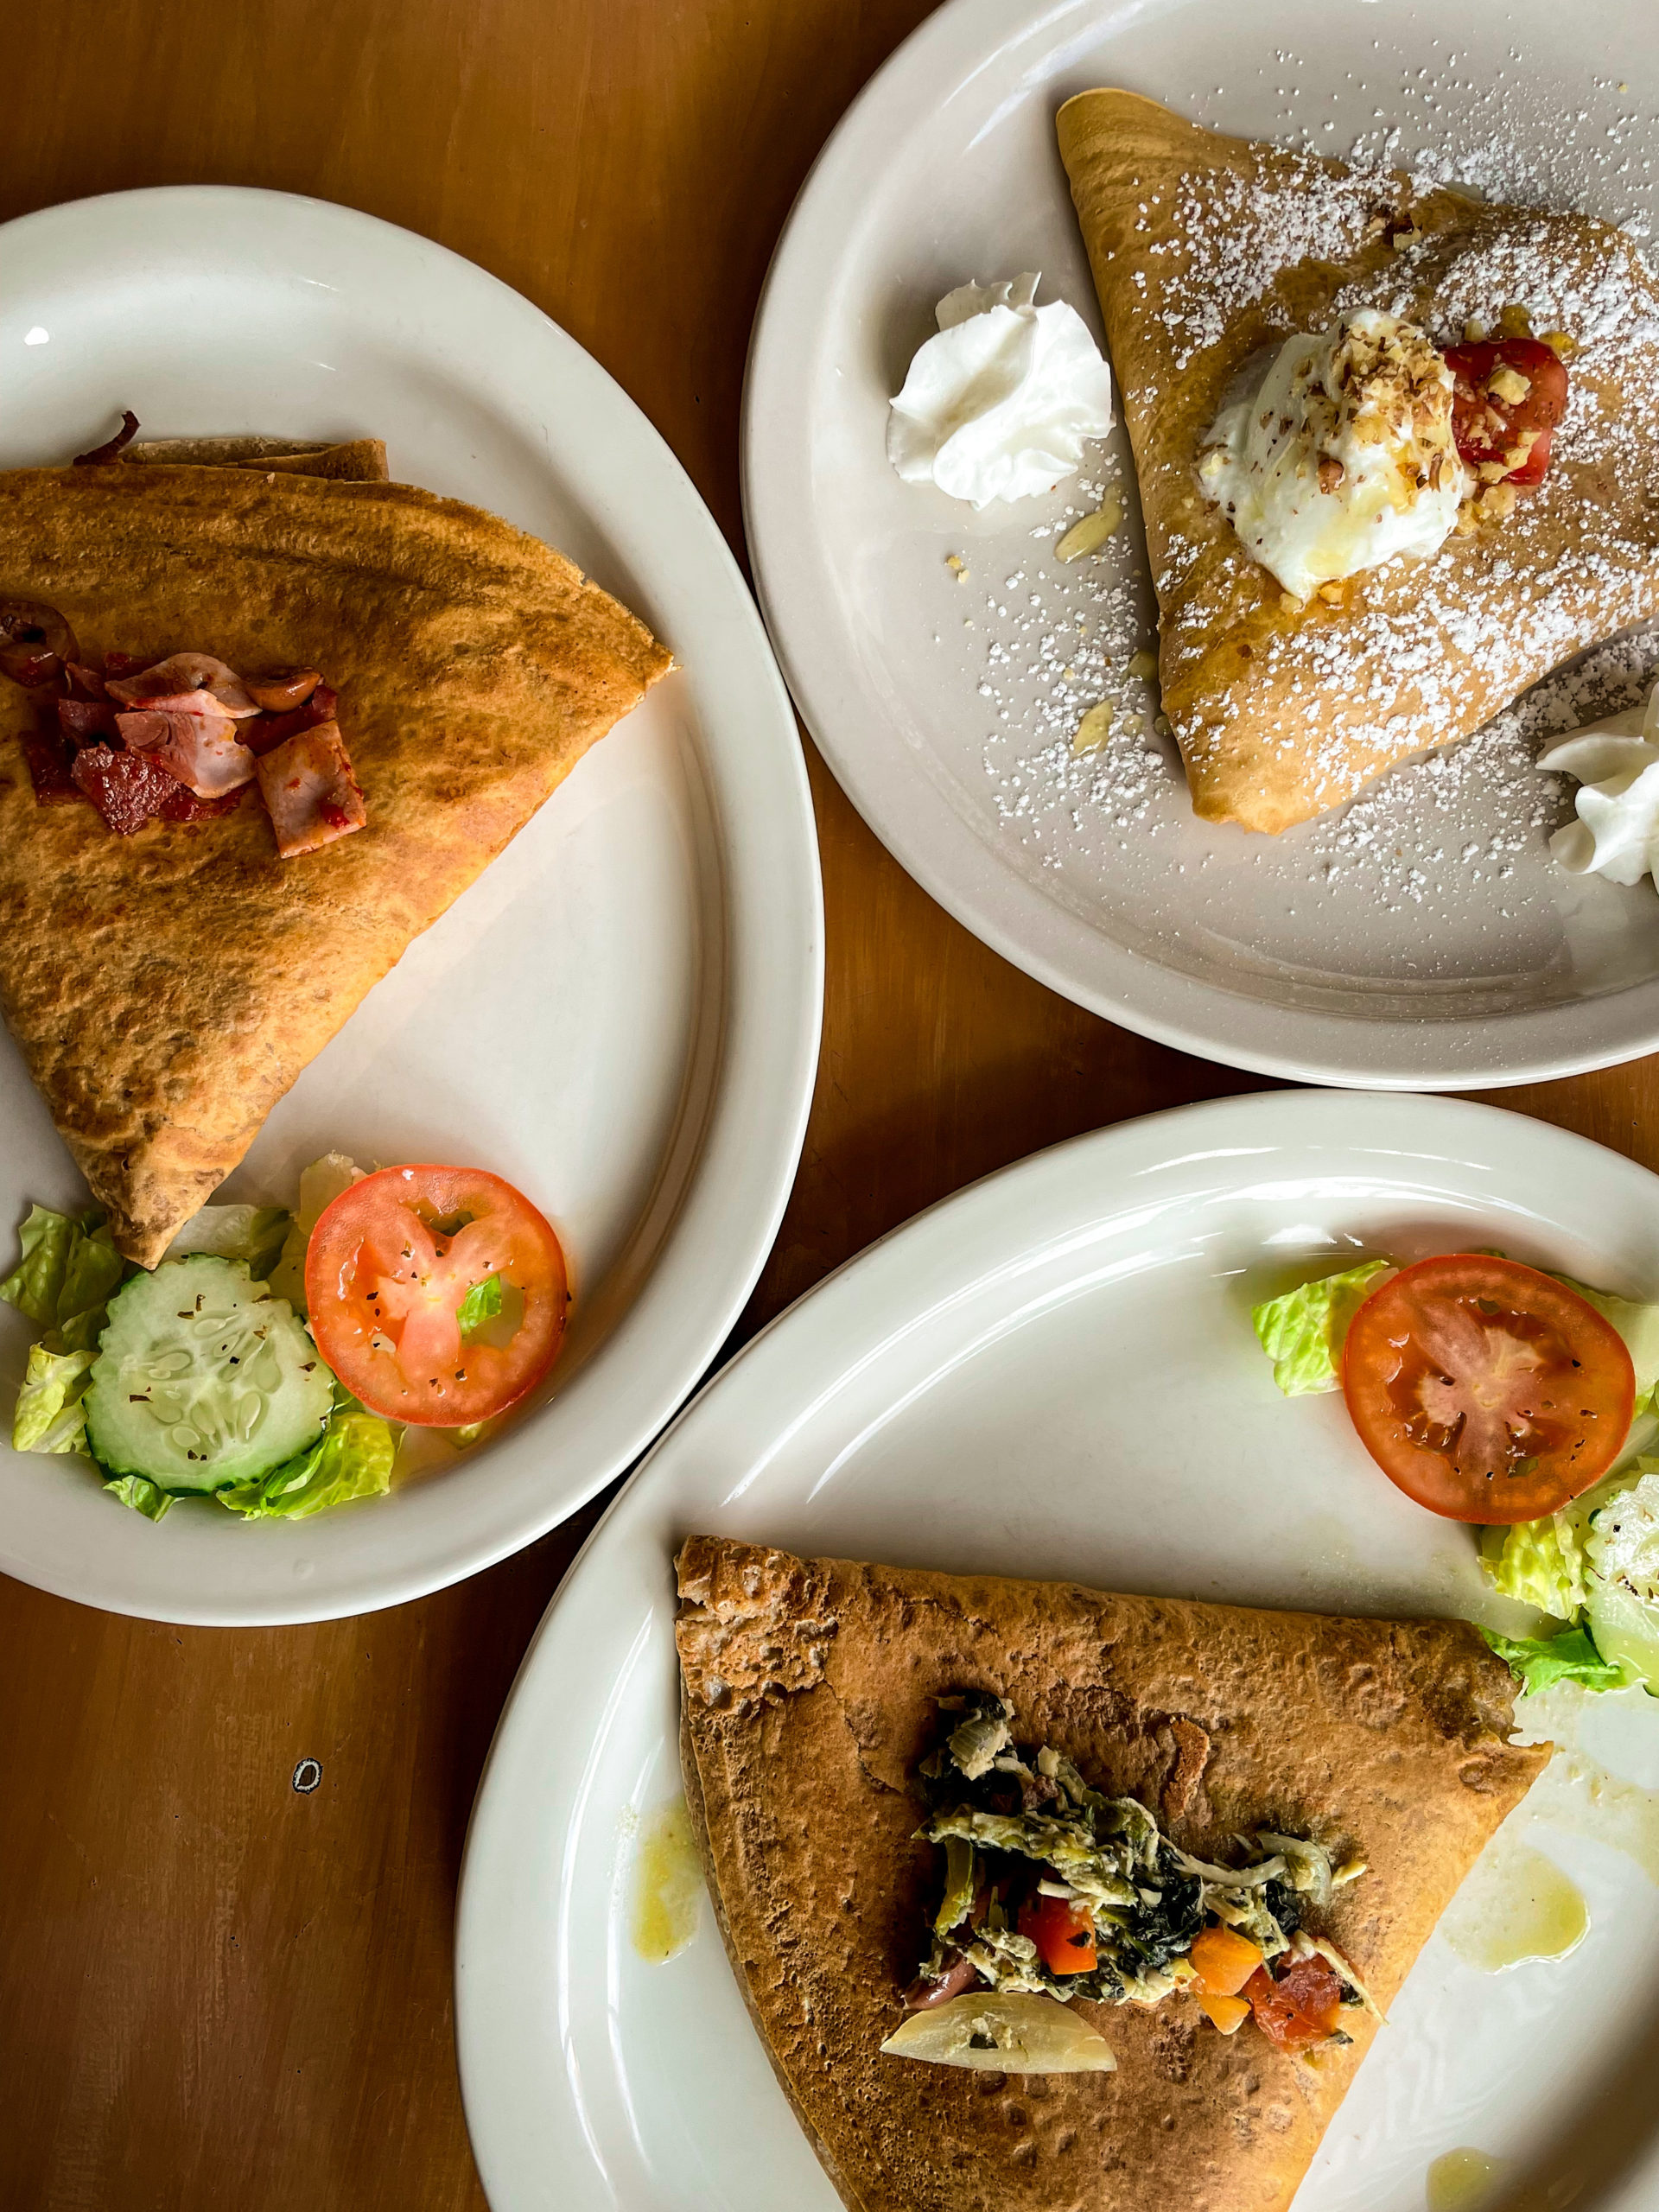 A breakfast spread of crepes from La Creperia Cafe in Ybor City.